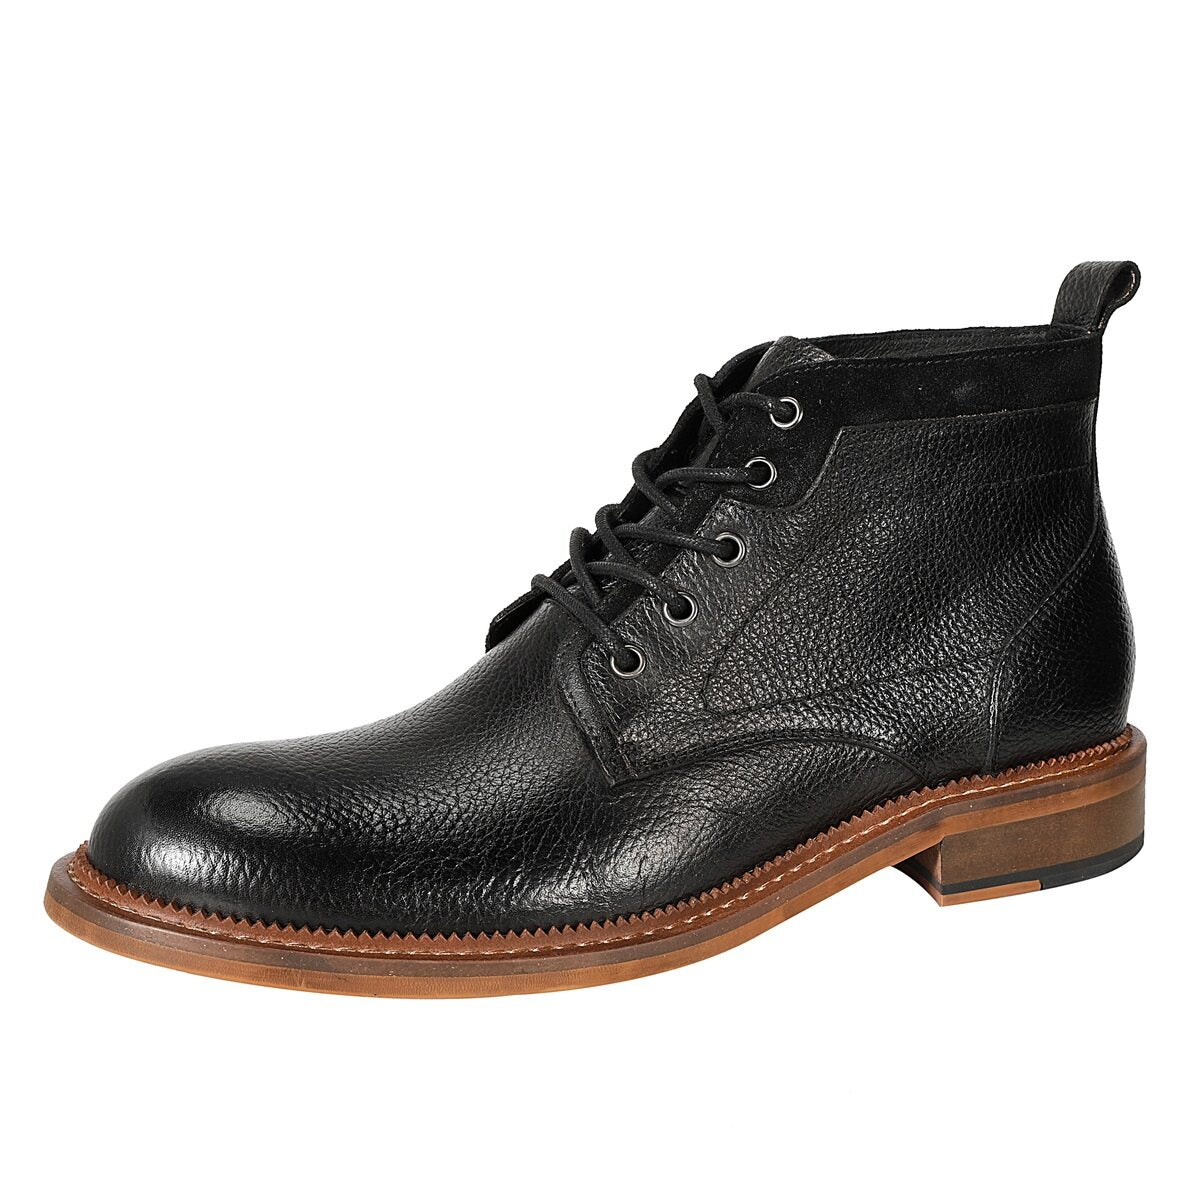 Men's Round-Toe High-Top Polo Boots in Black